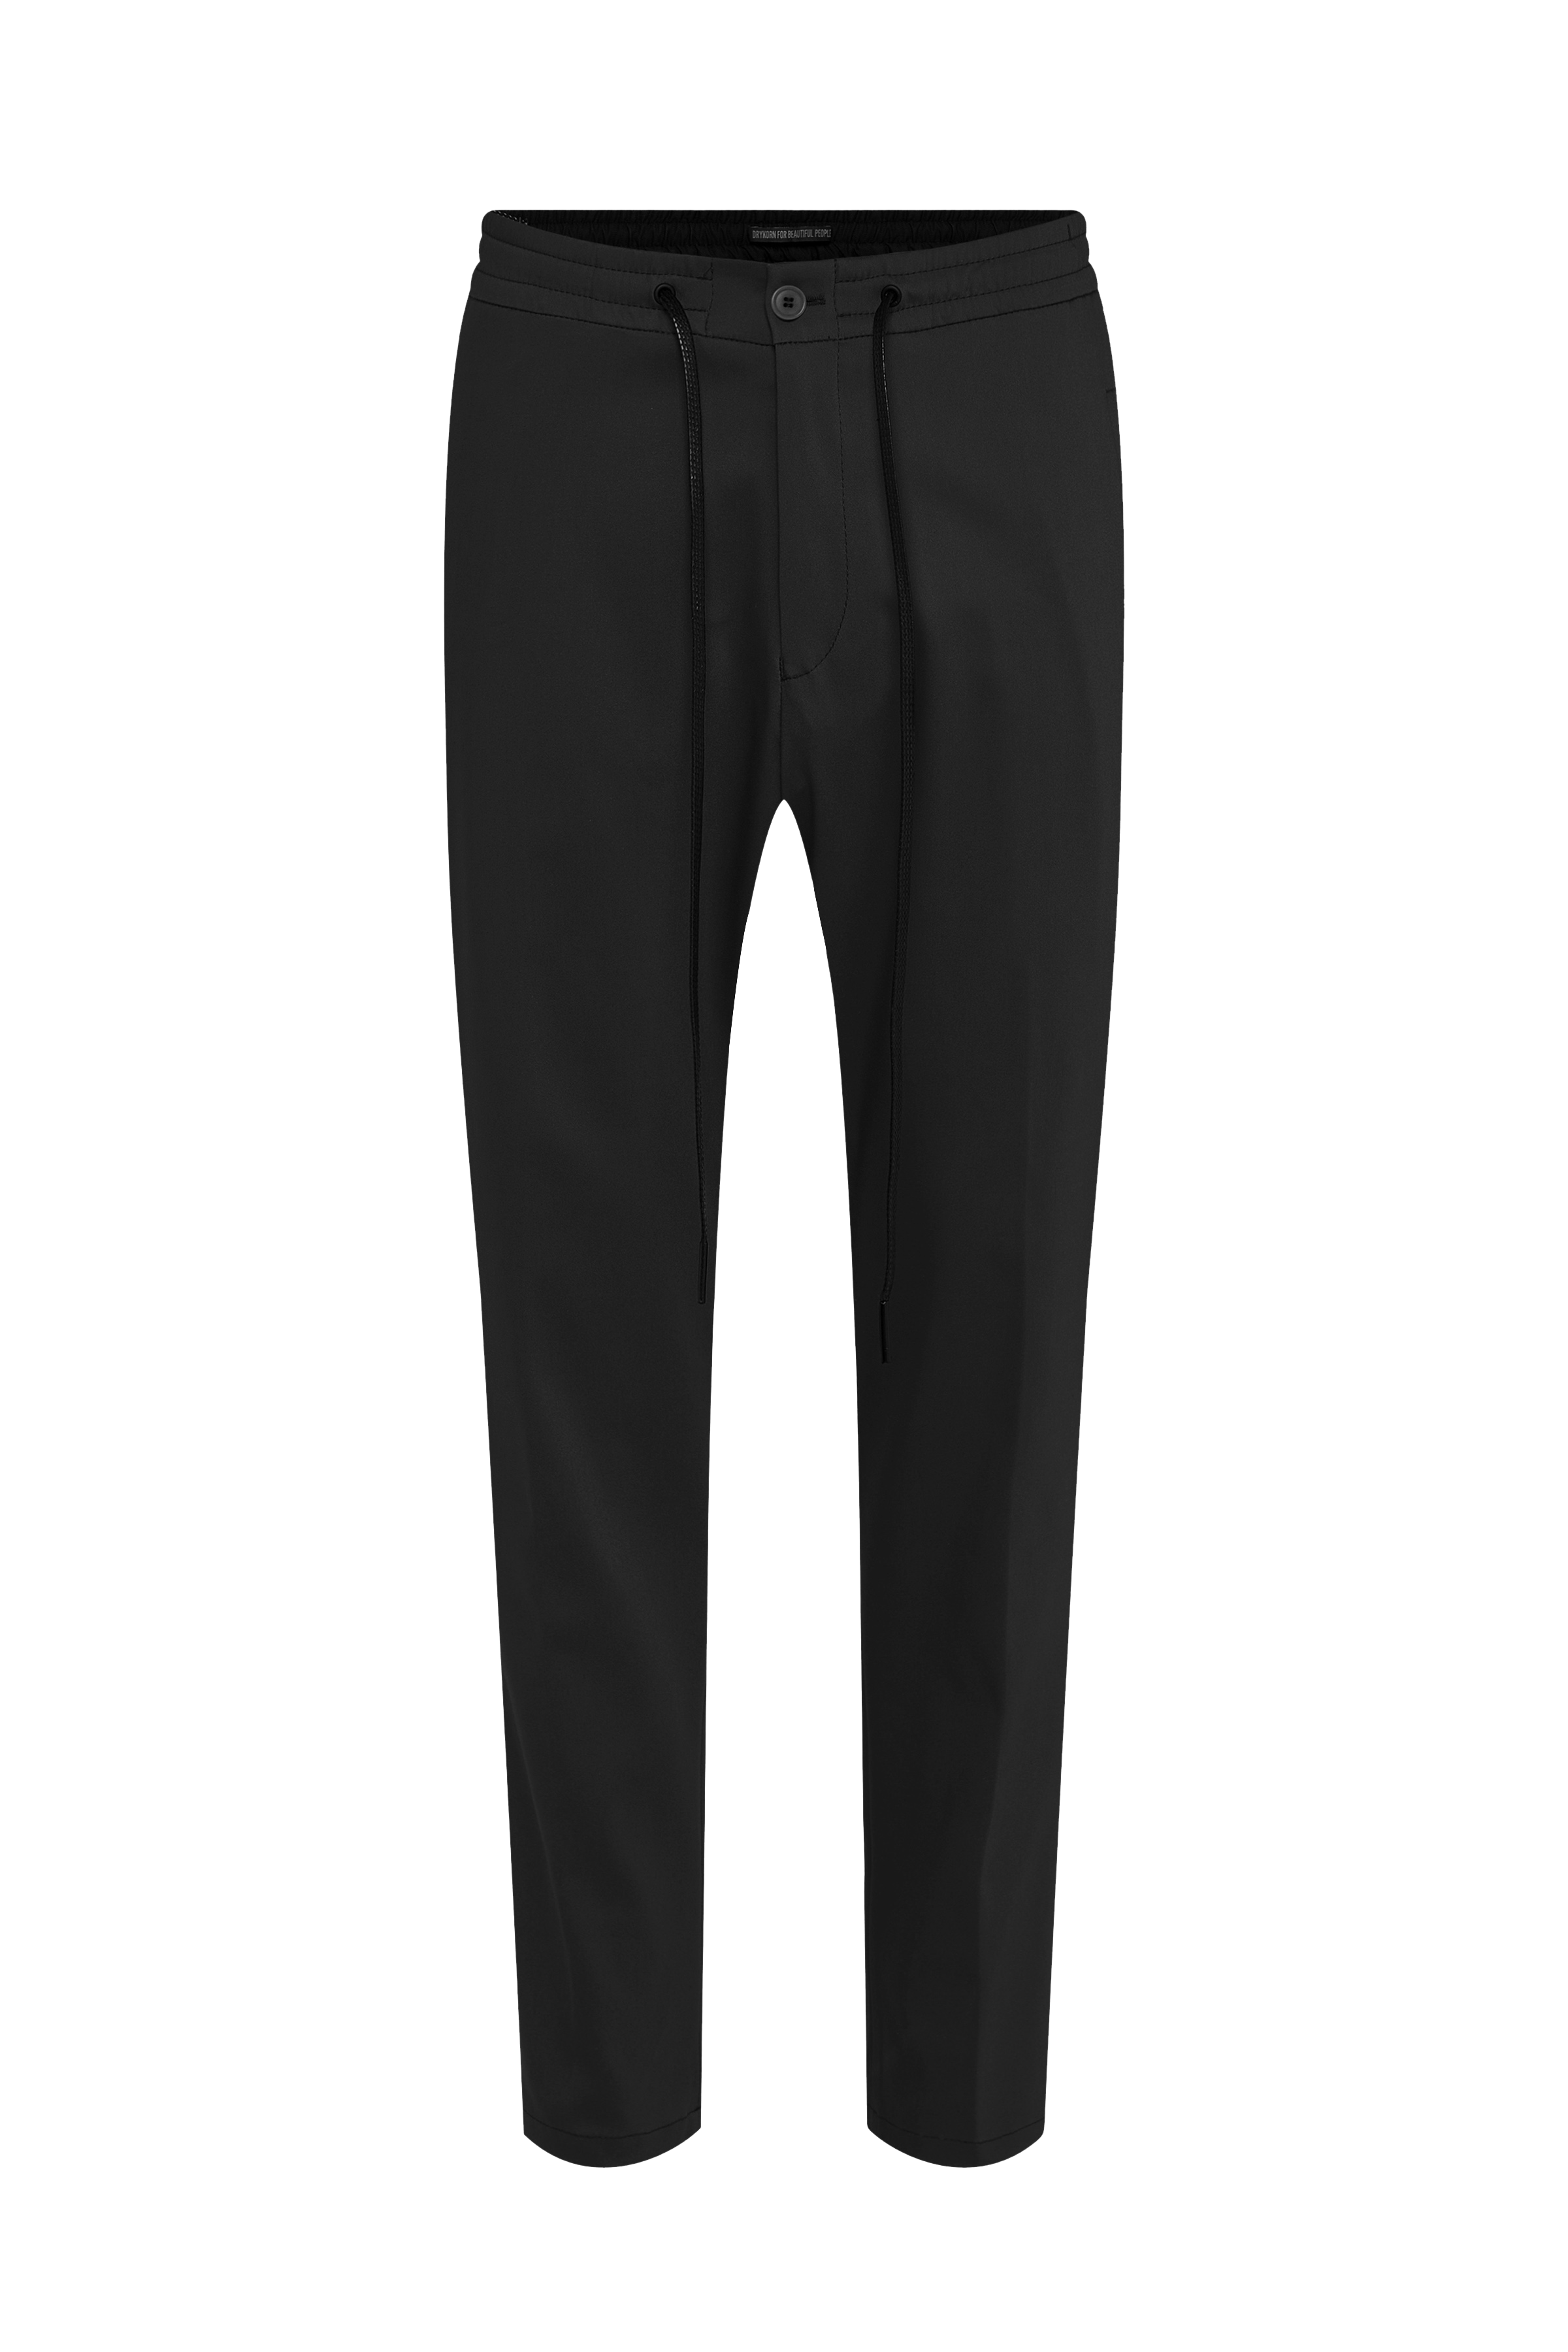 jog pants with drawstring in elastic cotton mix